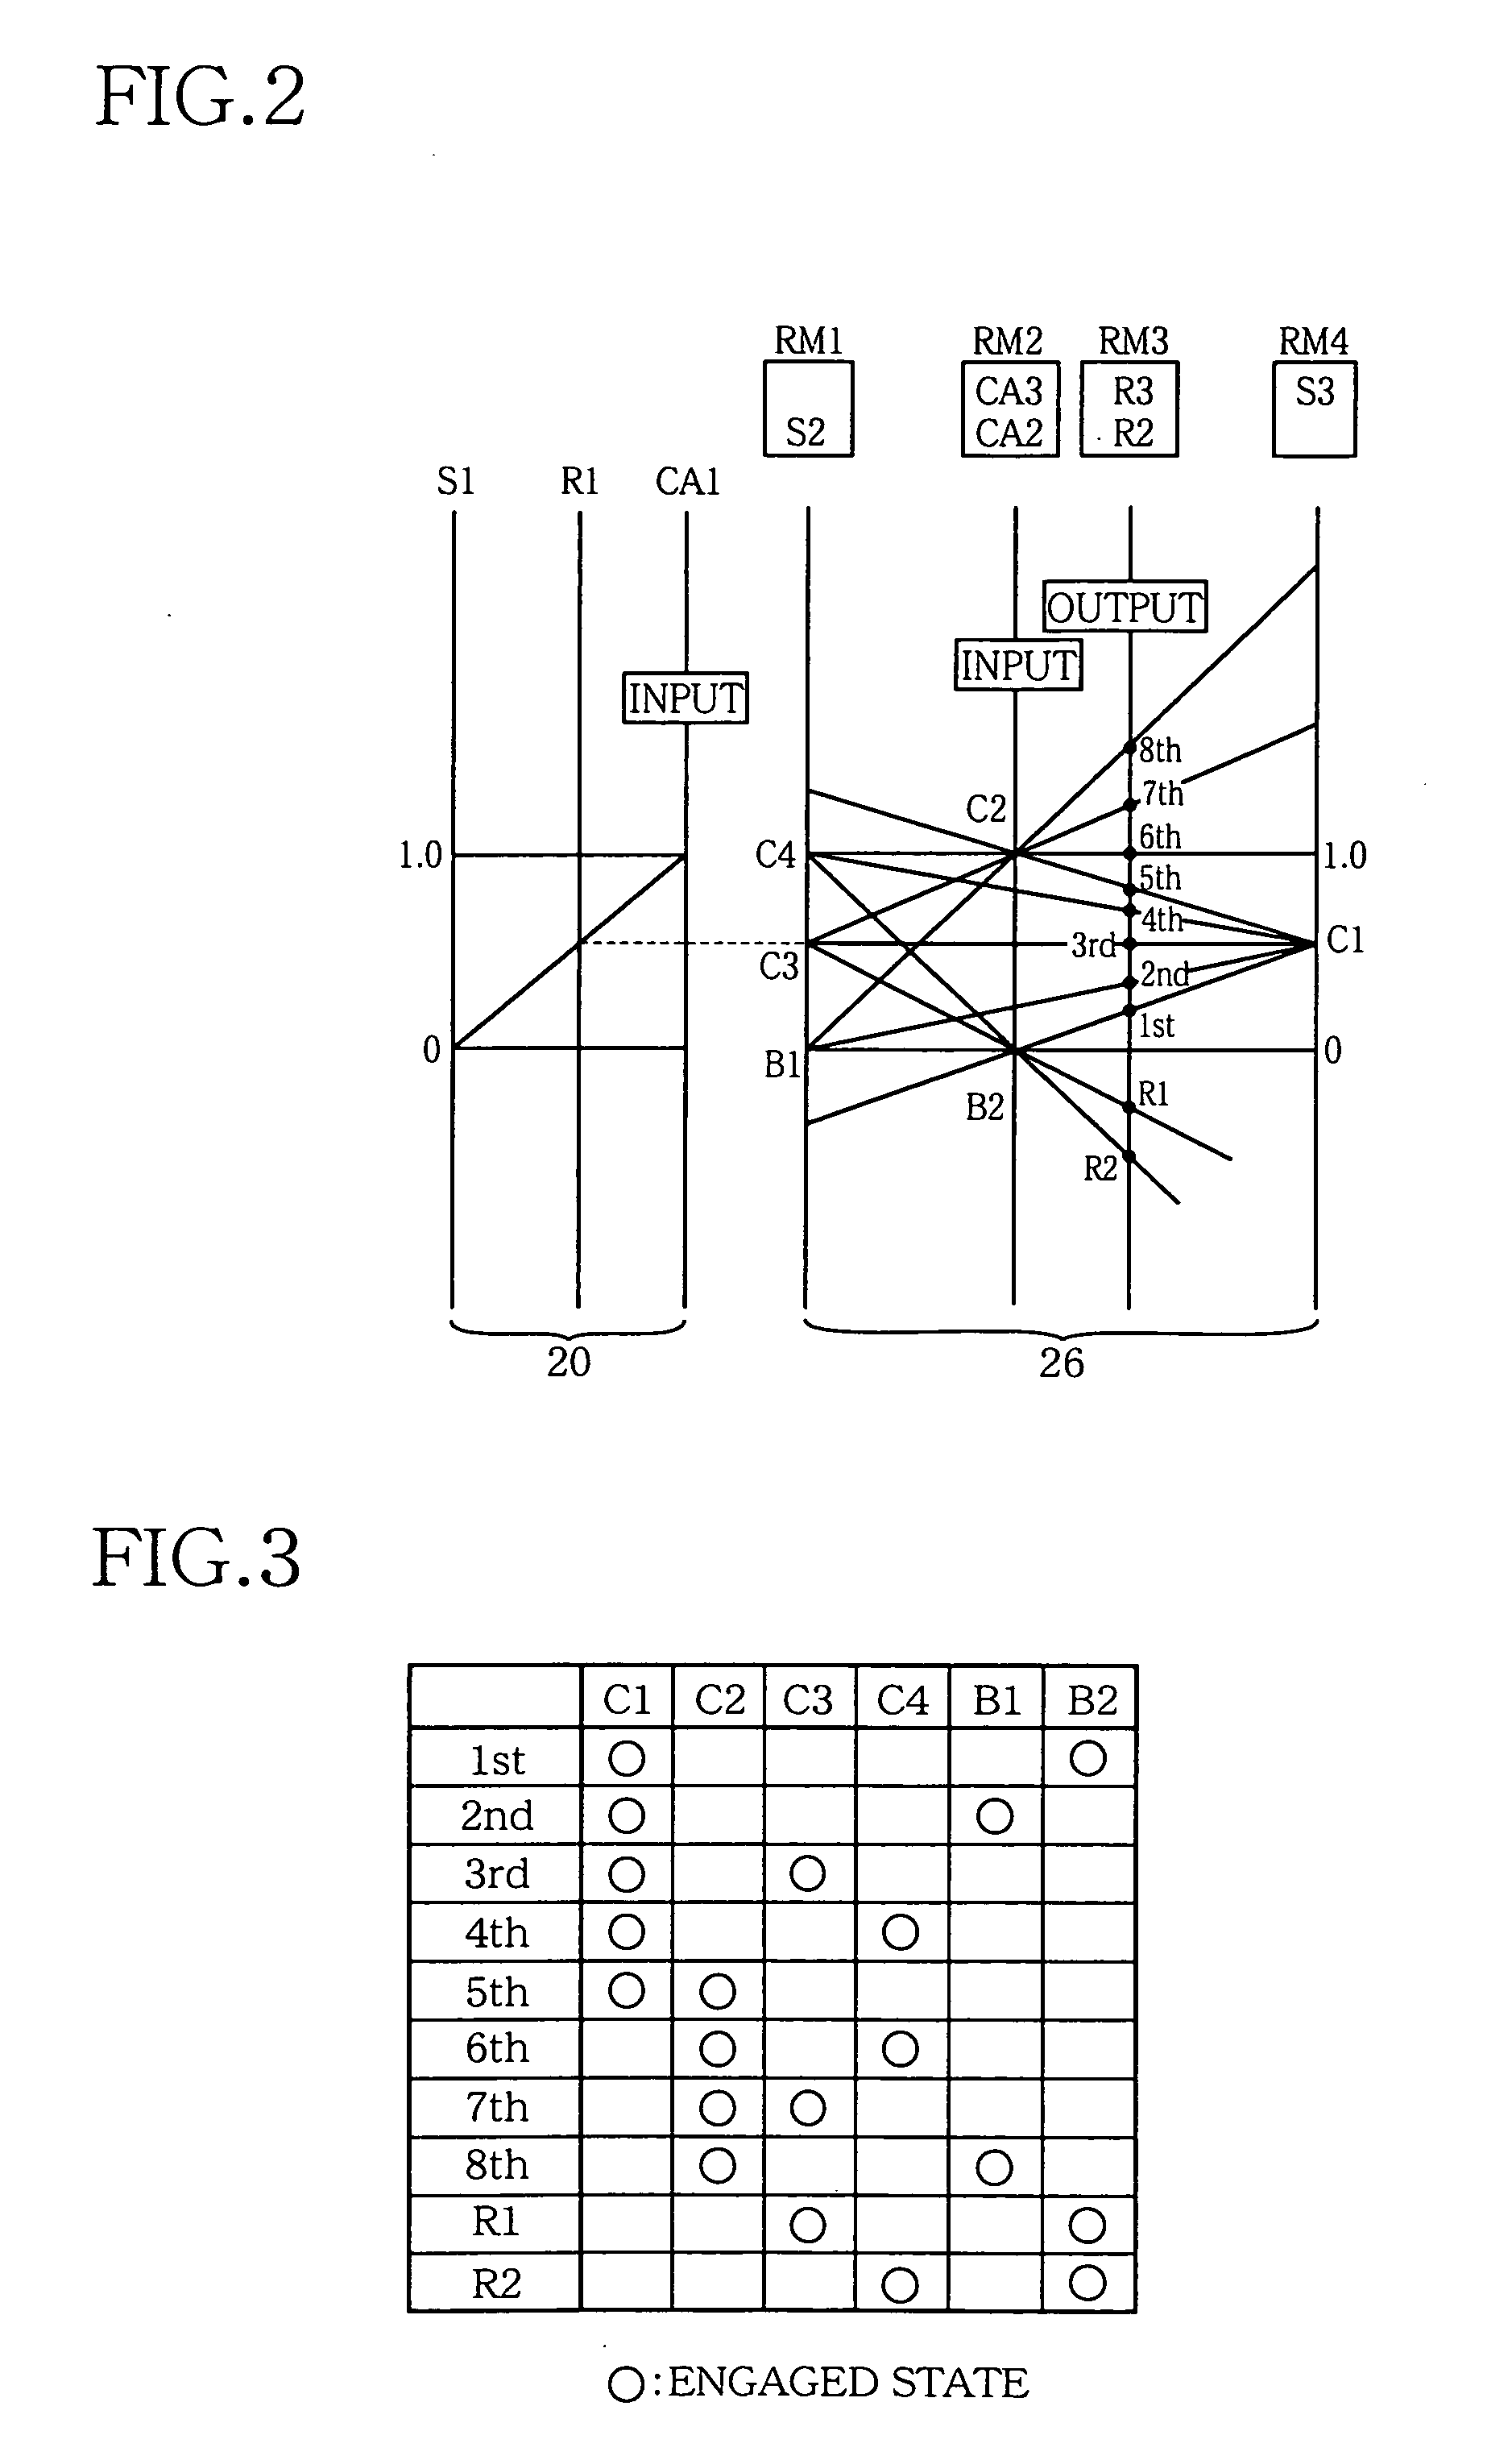 Control apparatus for controlling stepped automatic transmission of vehicle